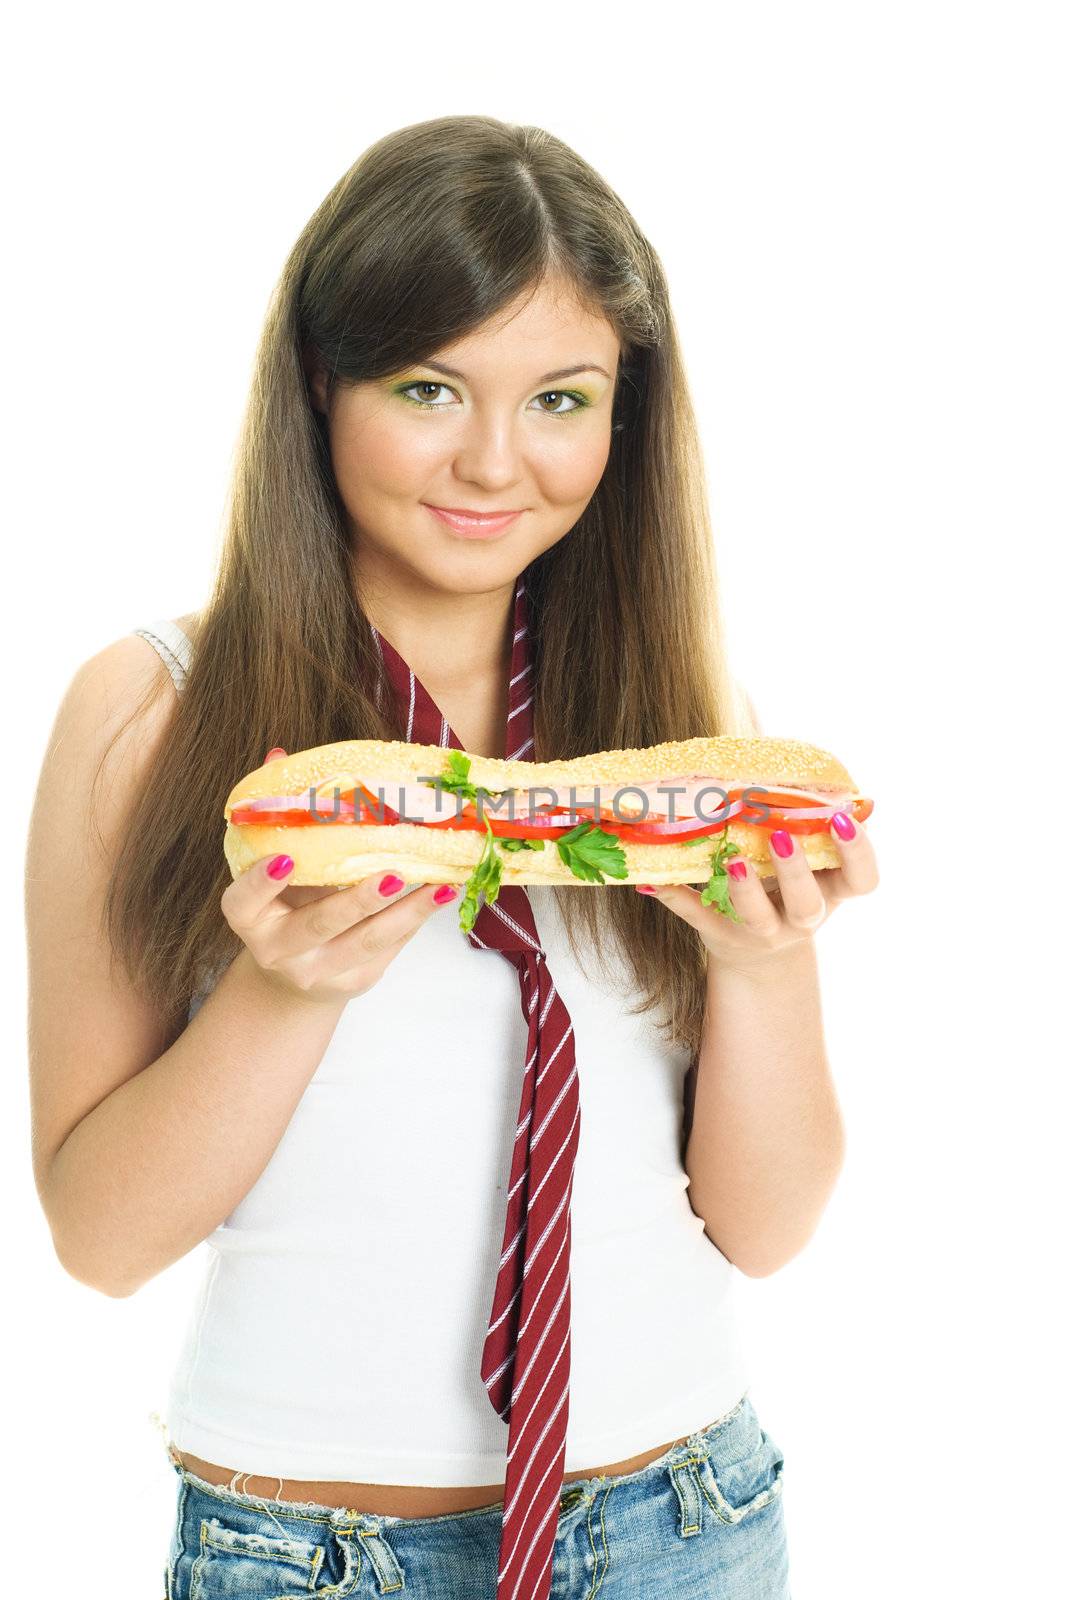 beautiful brunette girl eating a huge sandwich, isolated against white background